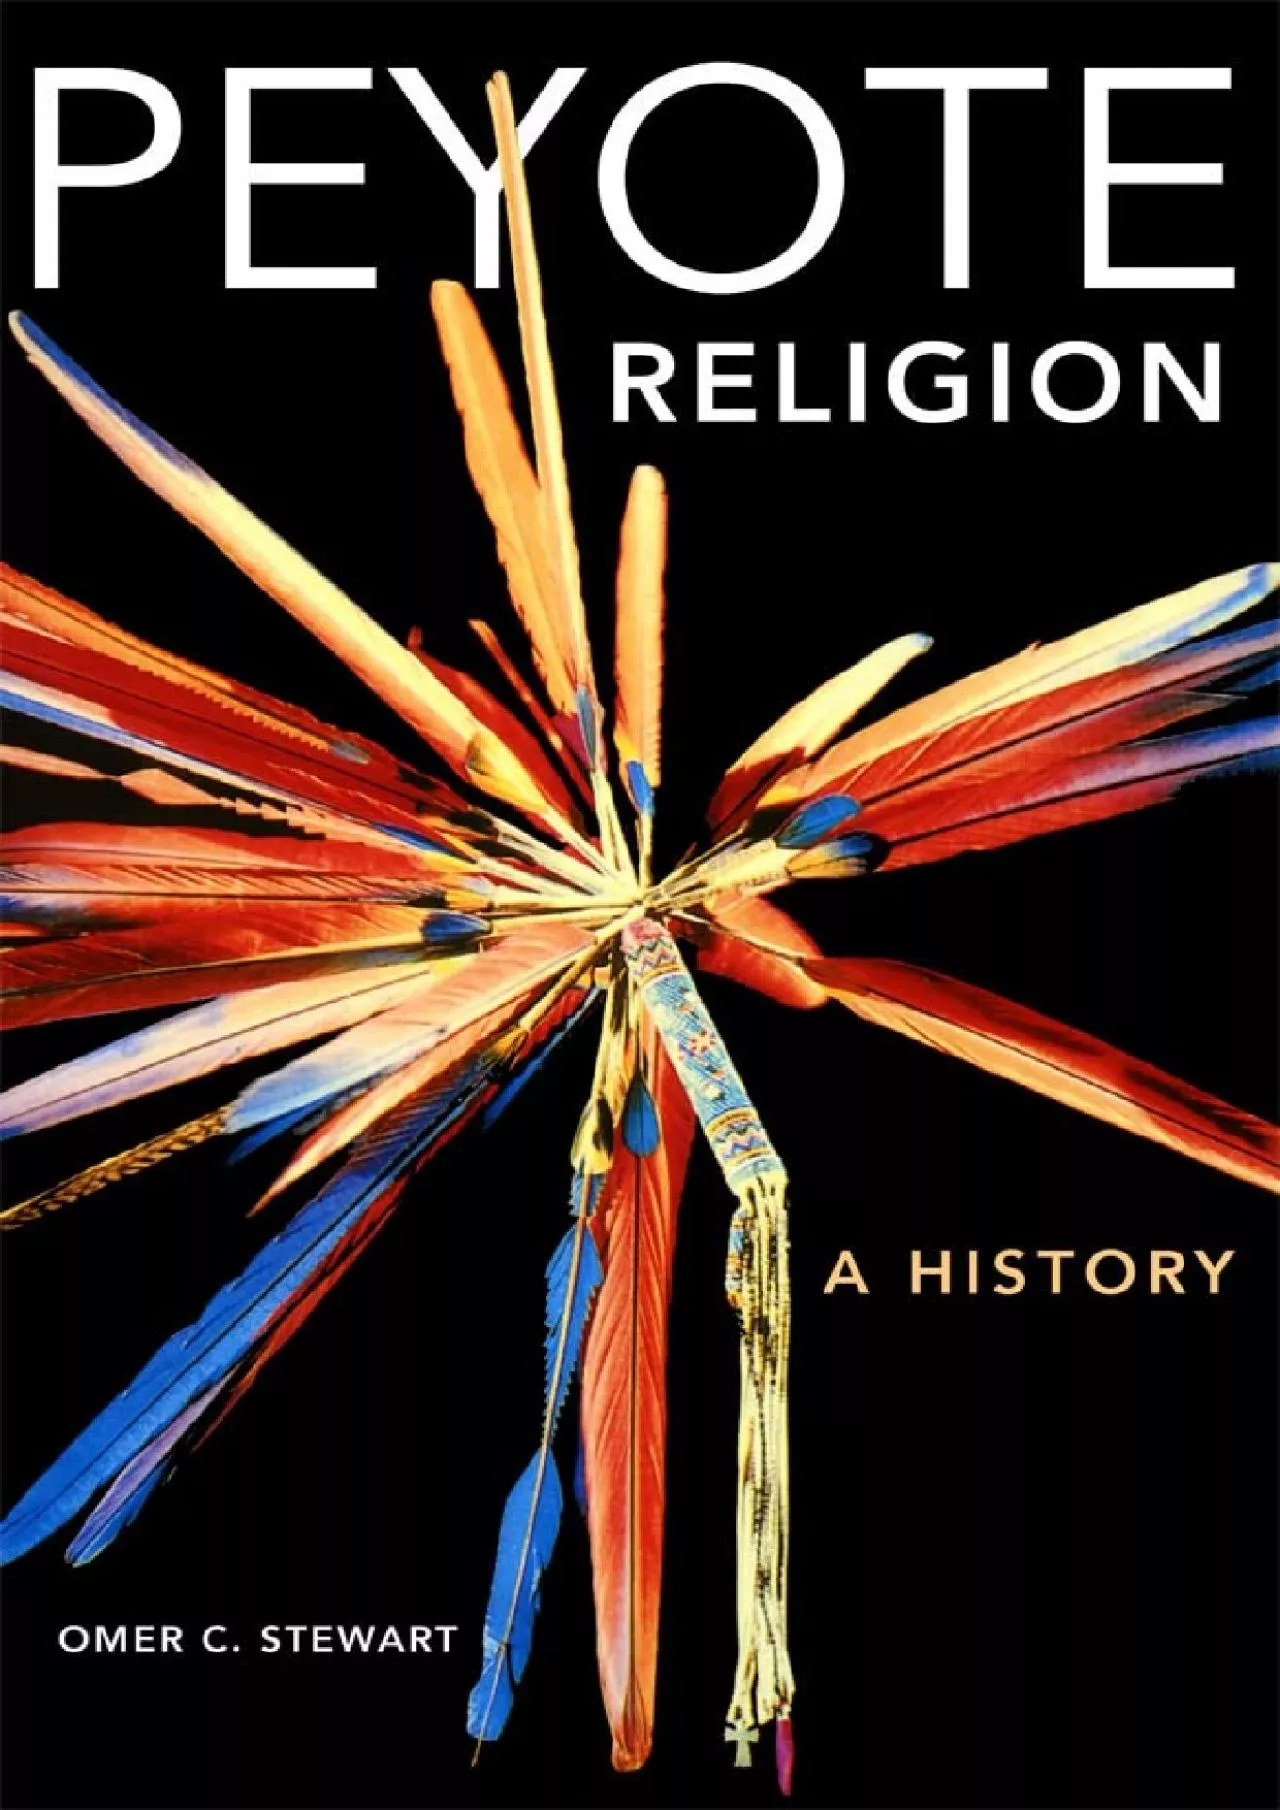 (EBOOK)-Peyote Religion: A History (Volume 181) (The Civilization of the American Indian